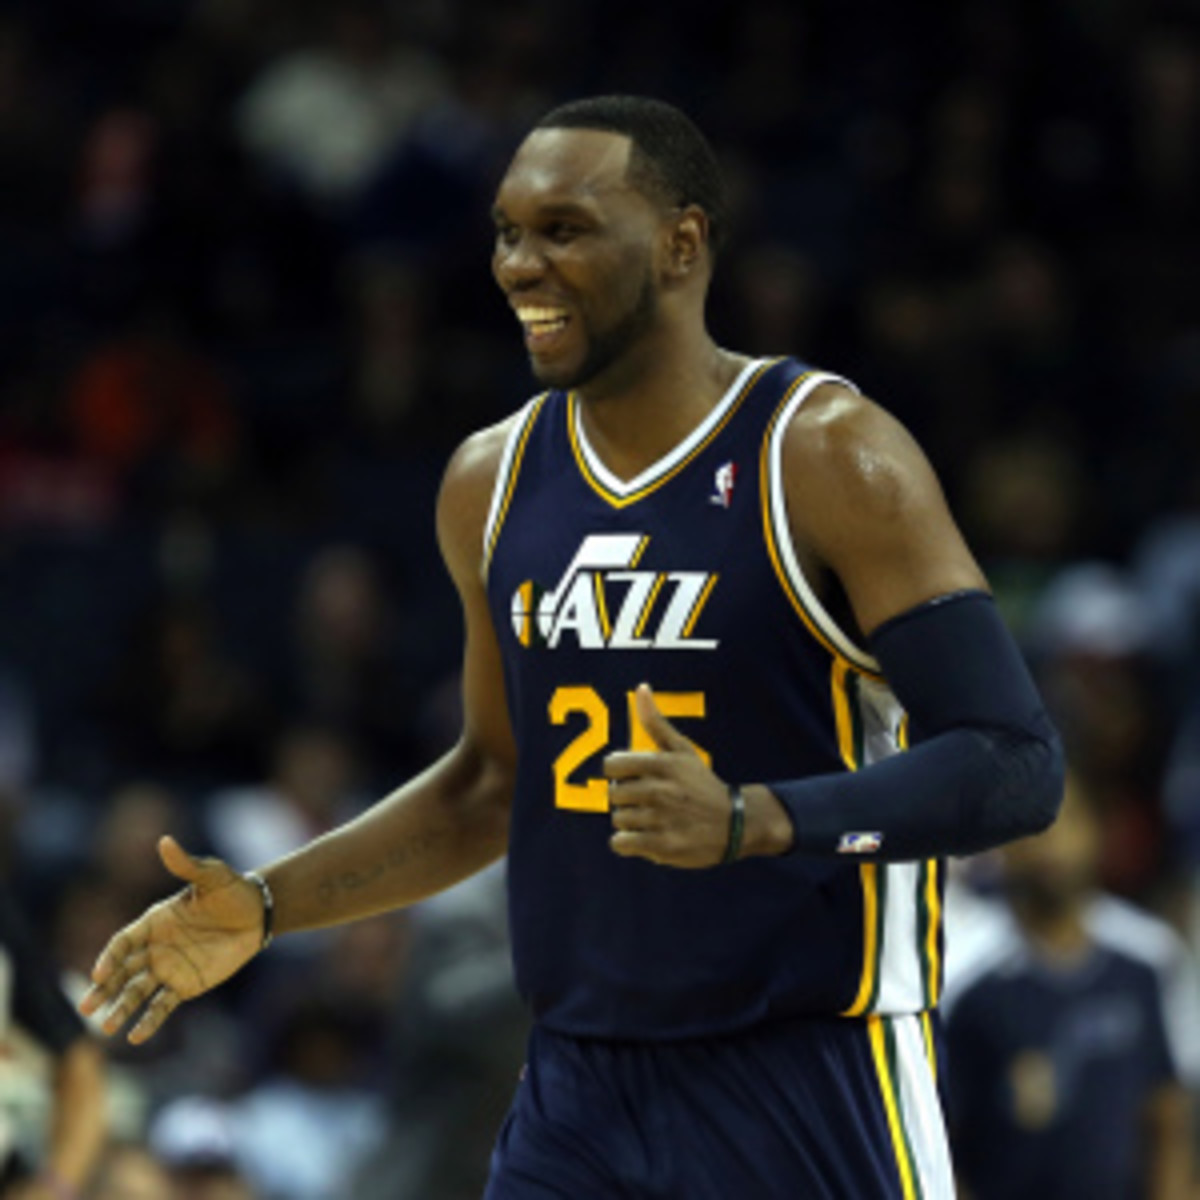 Al Jefferson could be headed to the Spurs. (Streeter Lecka/Getty Images)